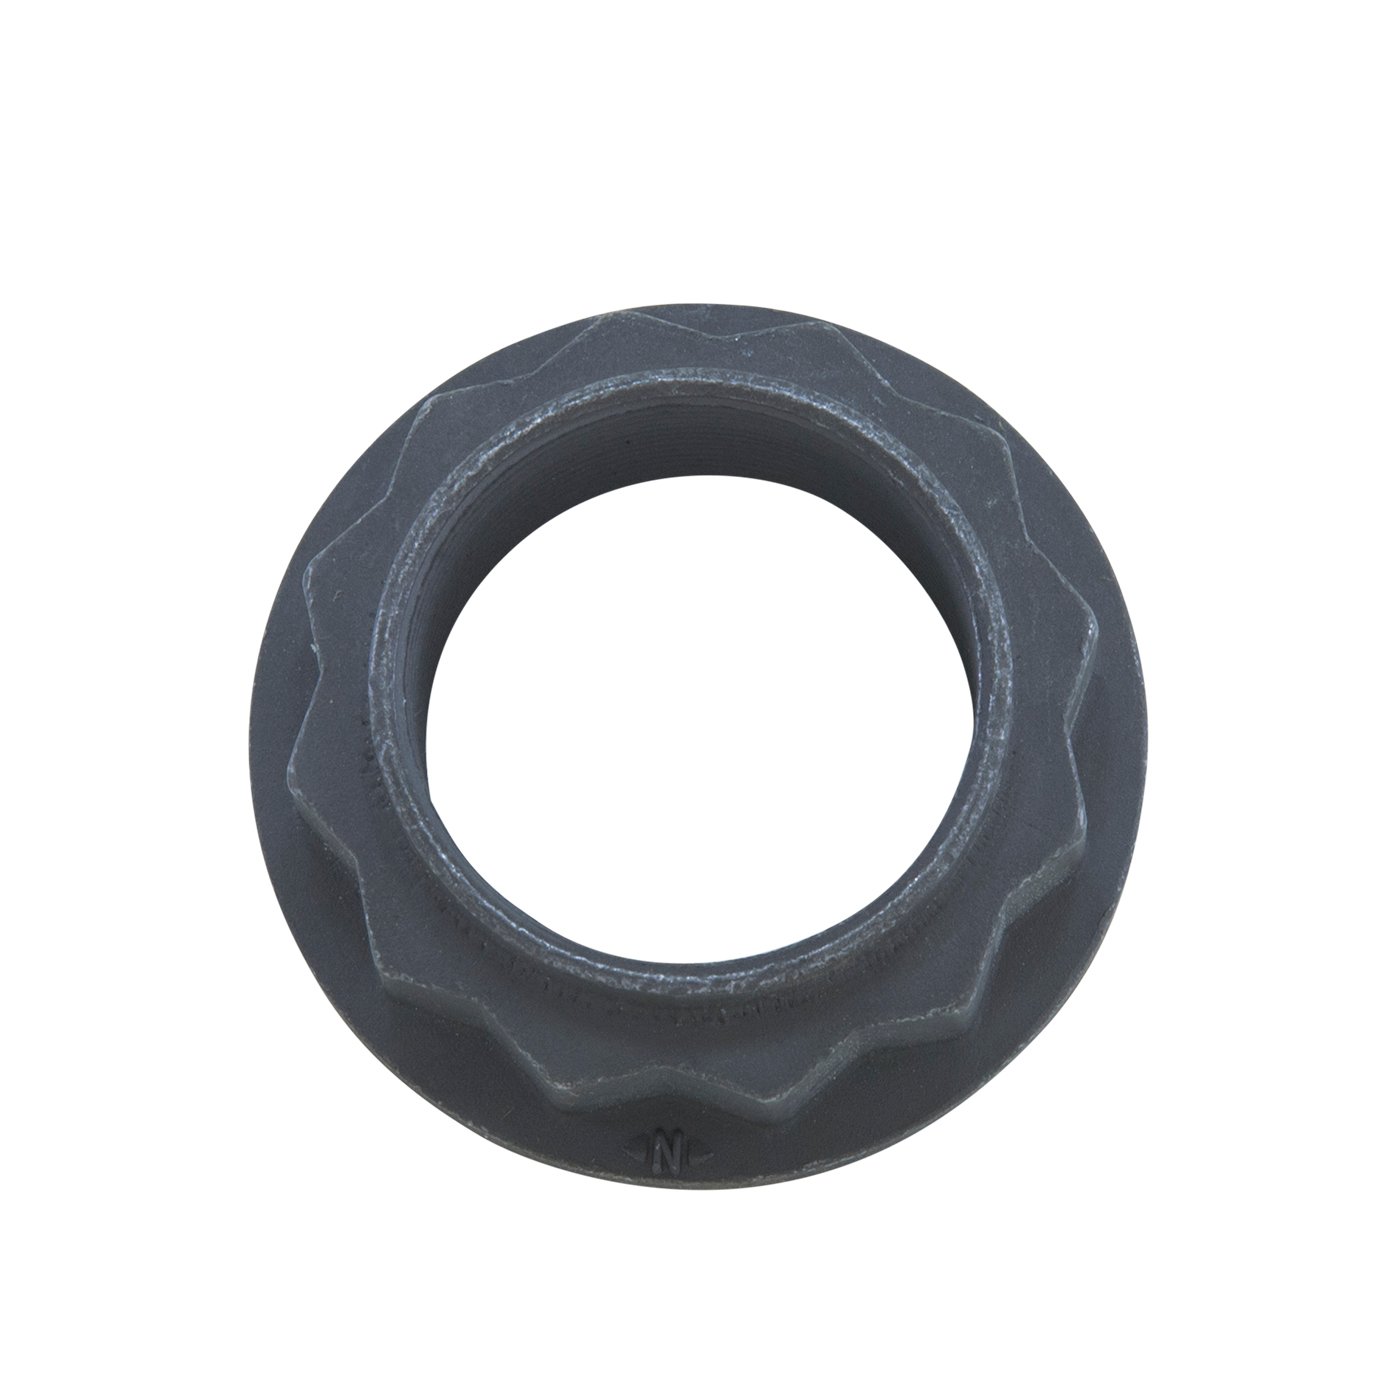 10.5 in., 11.5 in., And 11.8 in. Aam Pinion Nut Washer